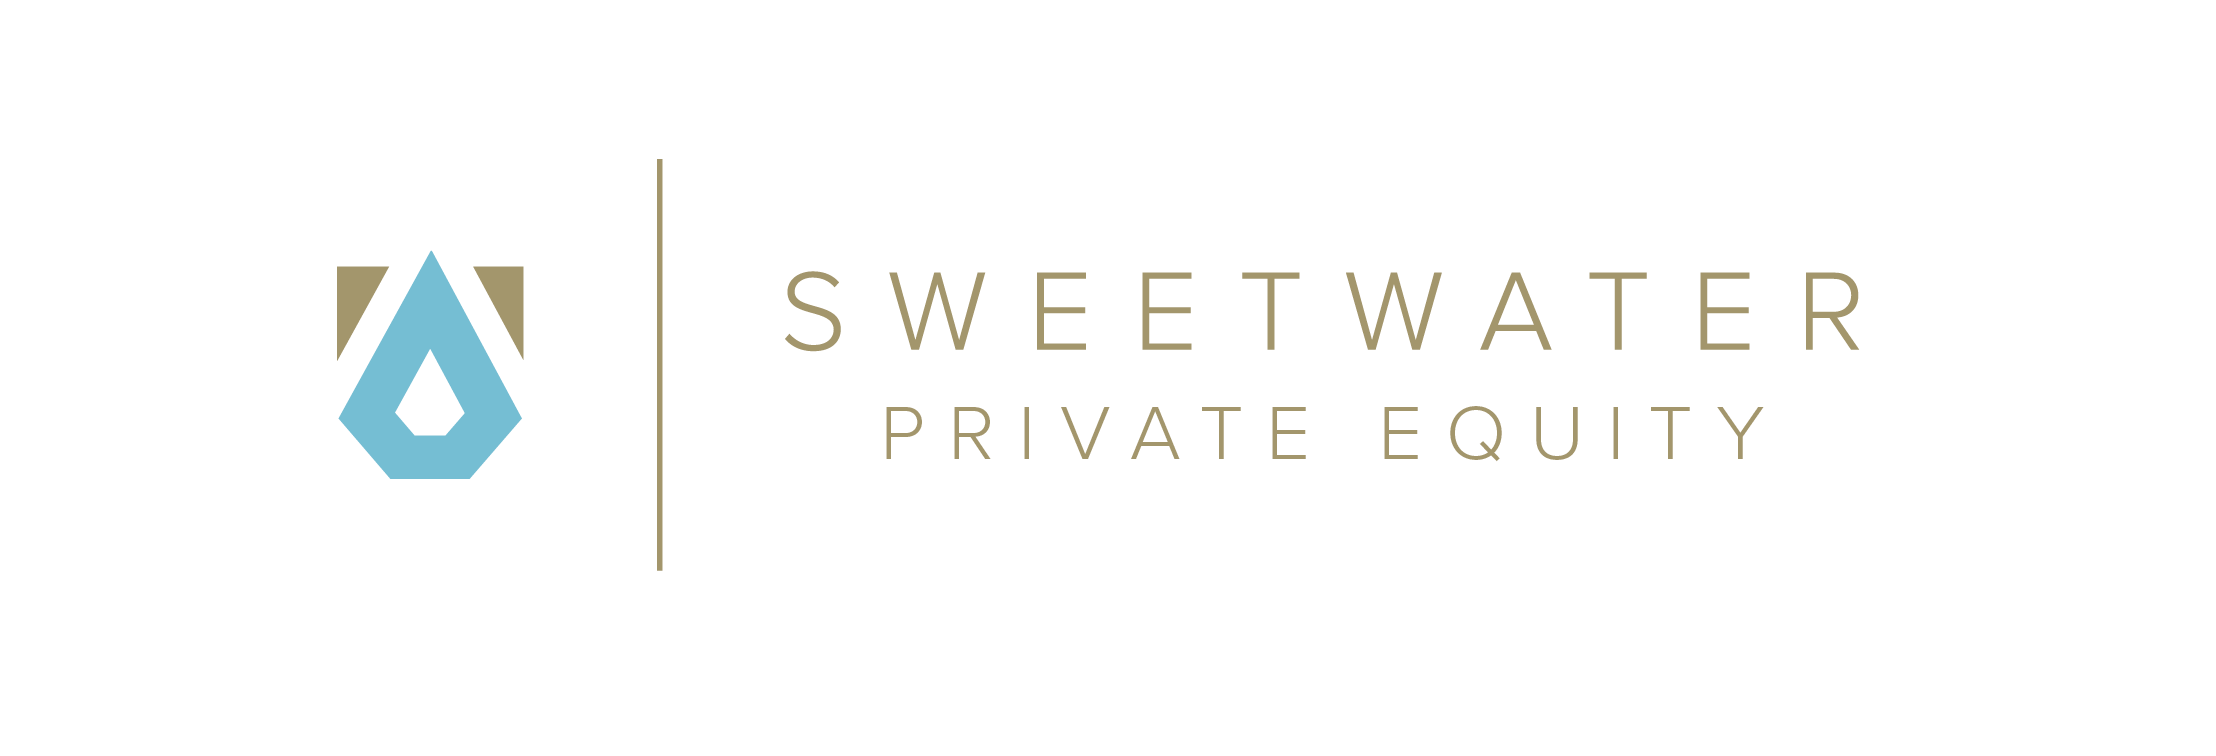 SWEETWATER PRIVATE EQUITY